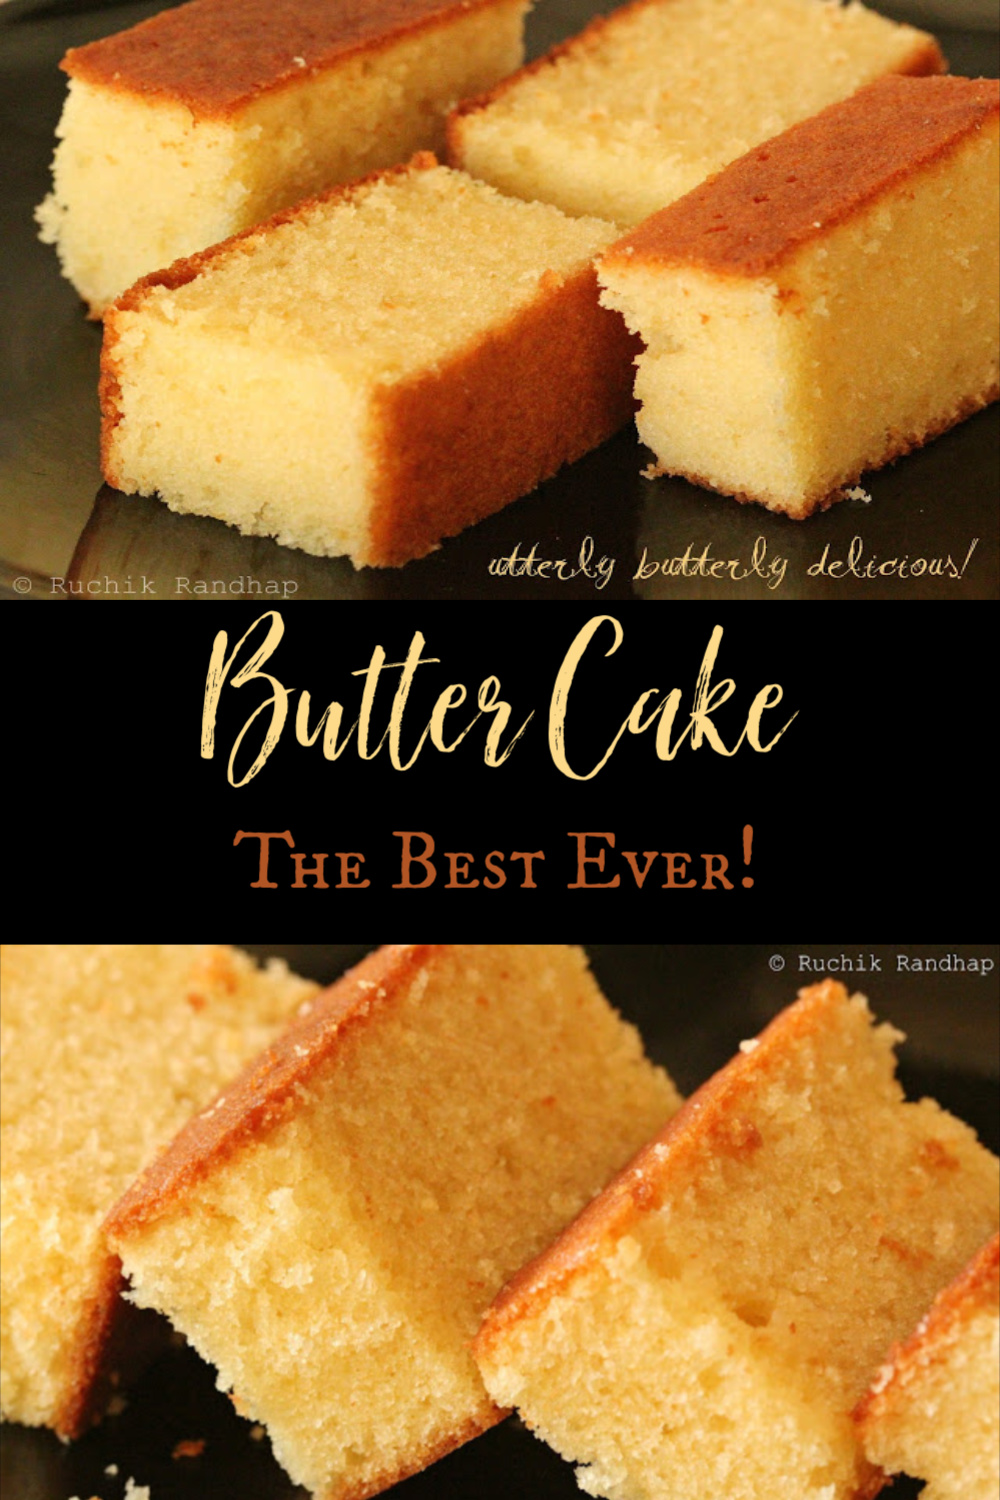 The perfect Butter Cake - MyLoveOfBaking